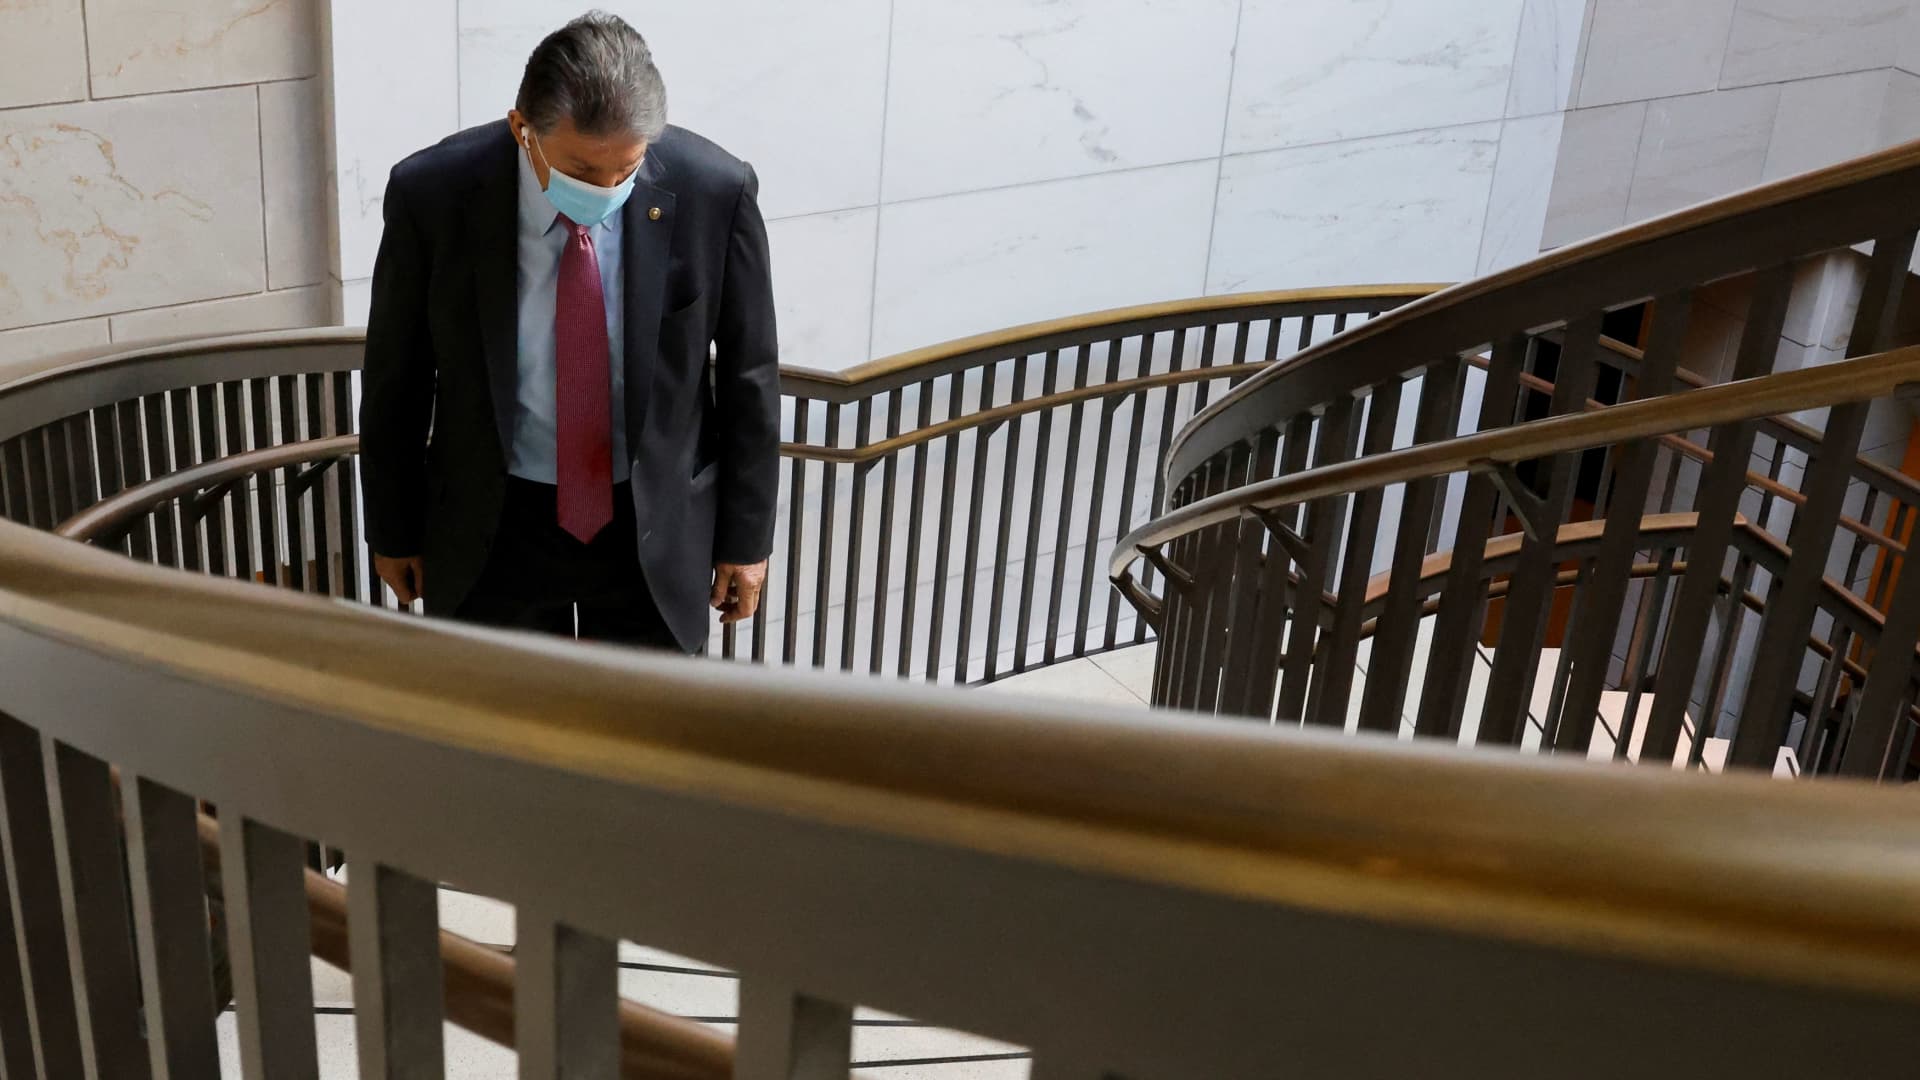 U.S. Senator Joe Manchin (D-WV) walks between meetings at the Capitol in the midst of ongoing negotiations over the Build Back Better bill, which aims to bolster the social safety net and fight climate change, in Washington, U.S. December 14, 2021.